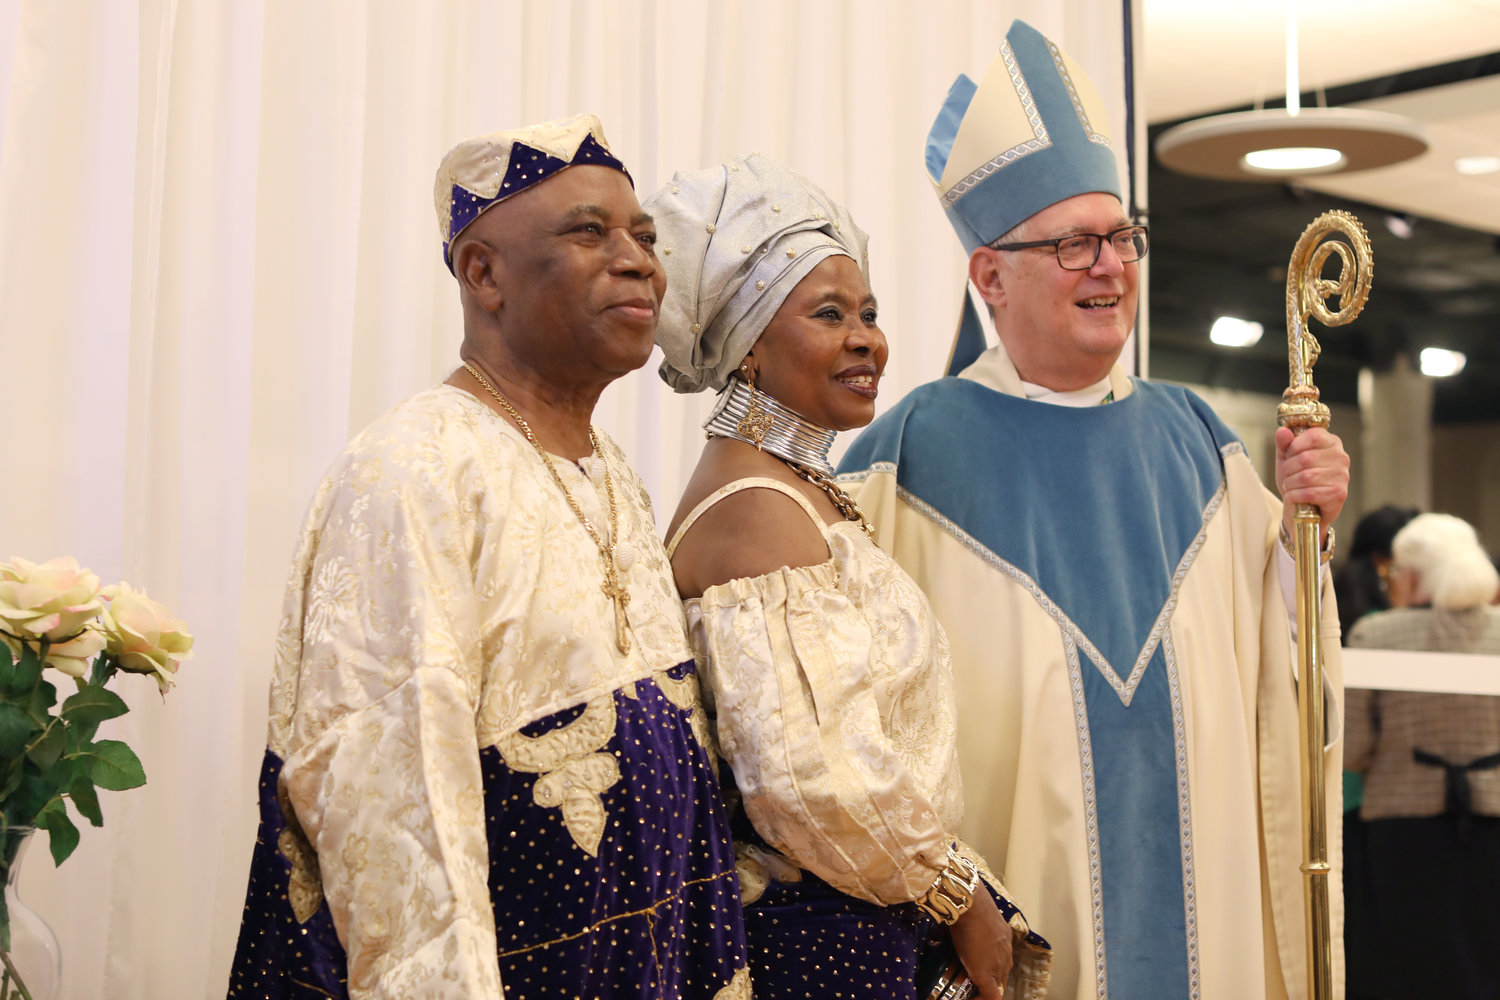 Celebrating 42 years of marriage, Augustina and Paschal Aguocha smile with Bishop Thomas J. Tobin after he offered Mass for couples celebrating wedding anniversaries.